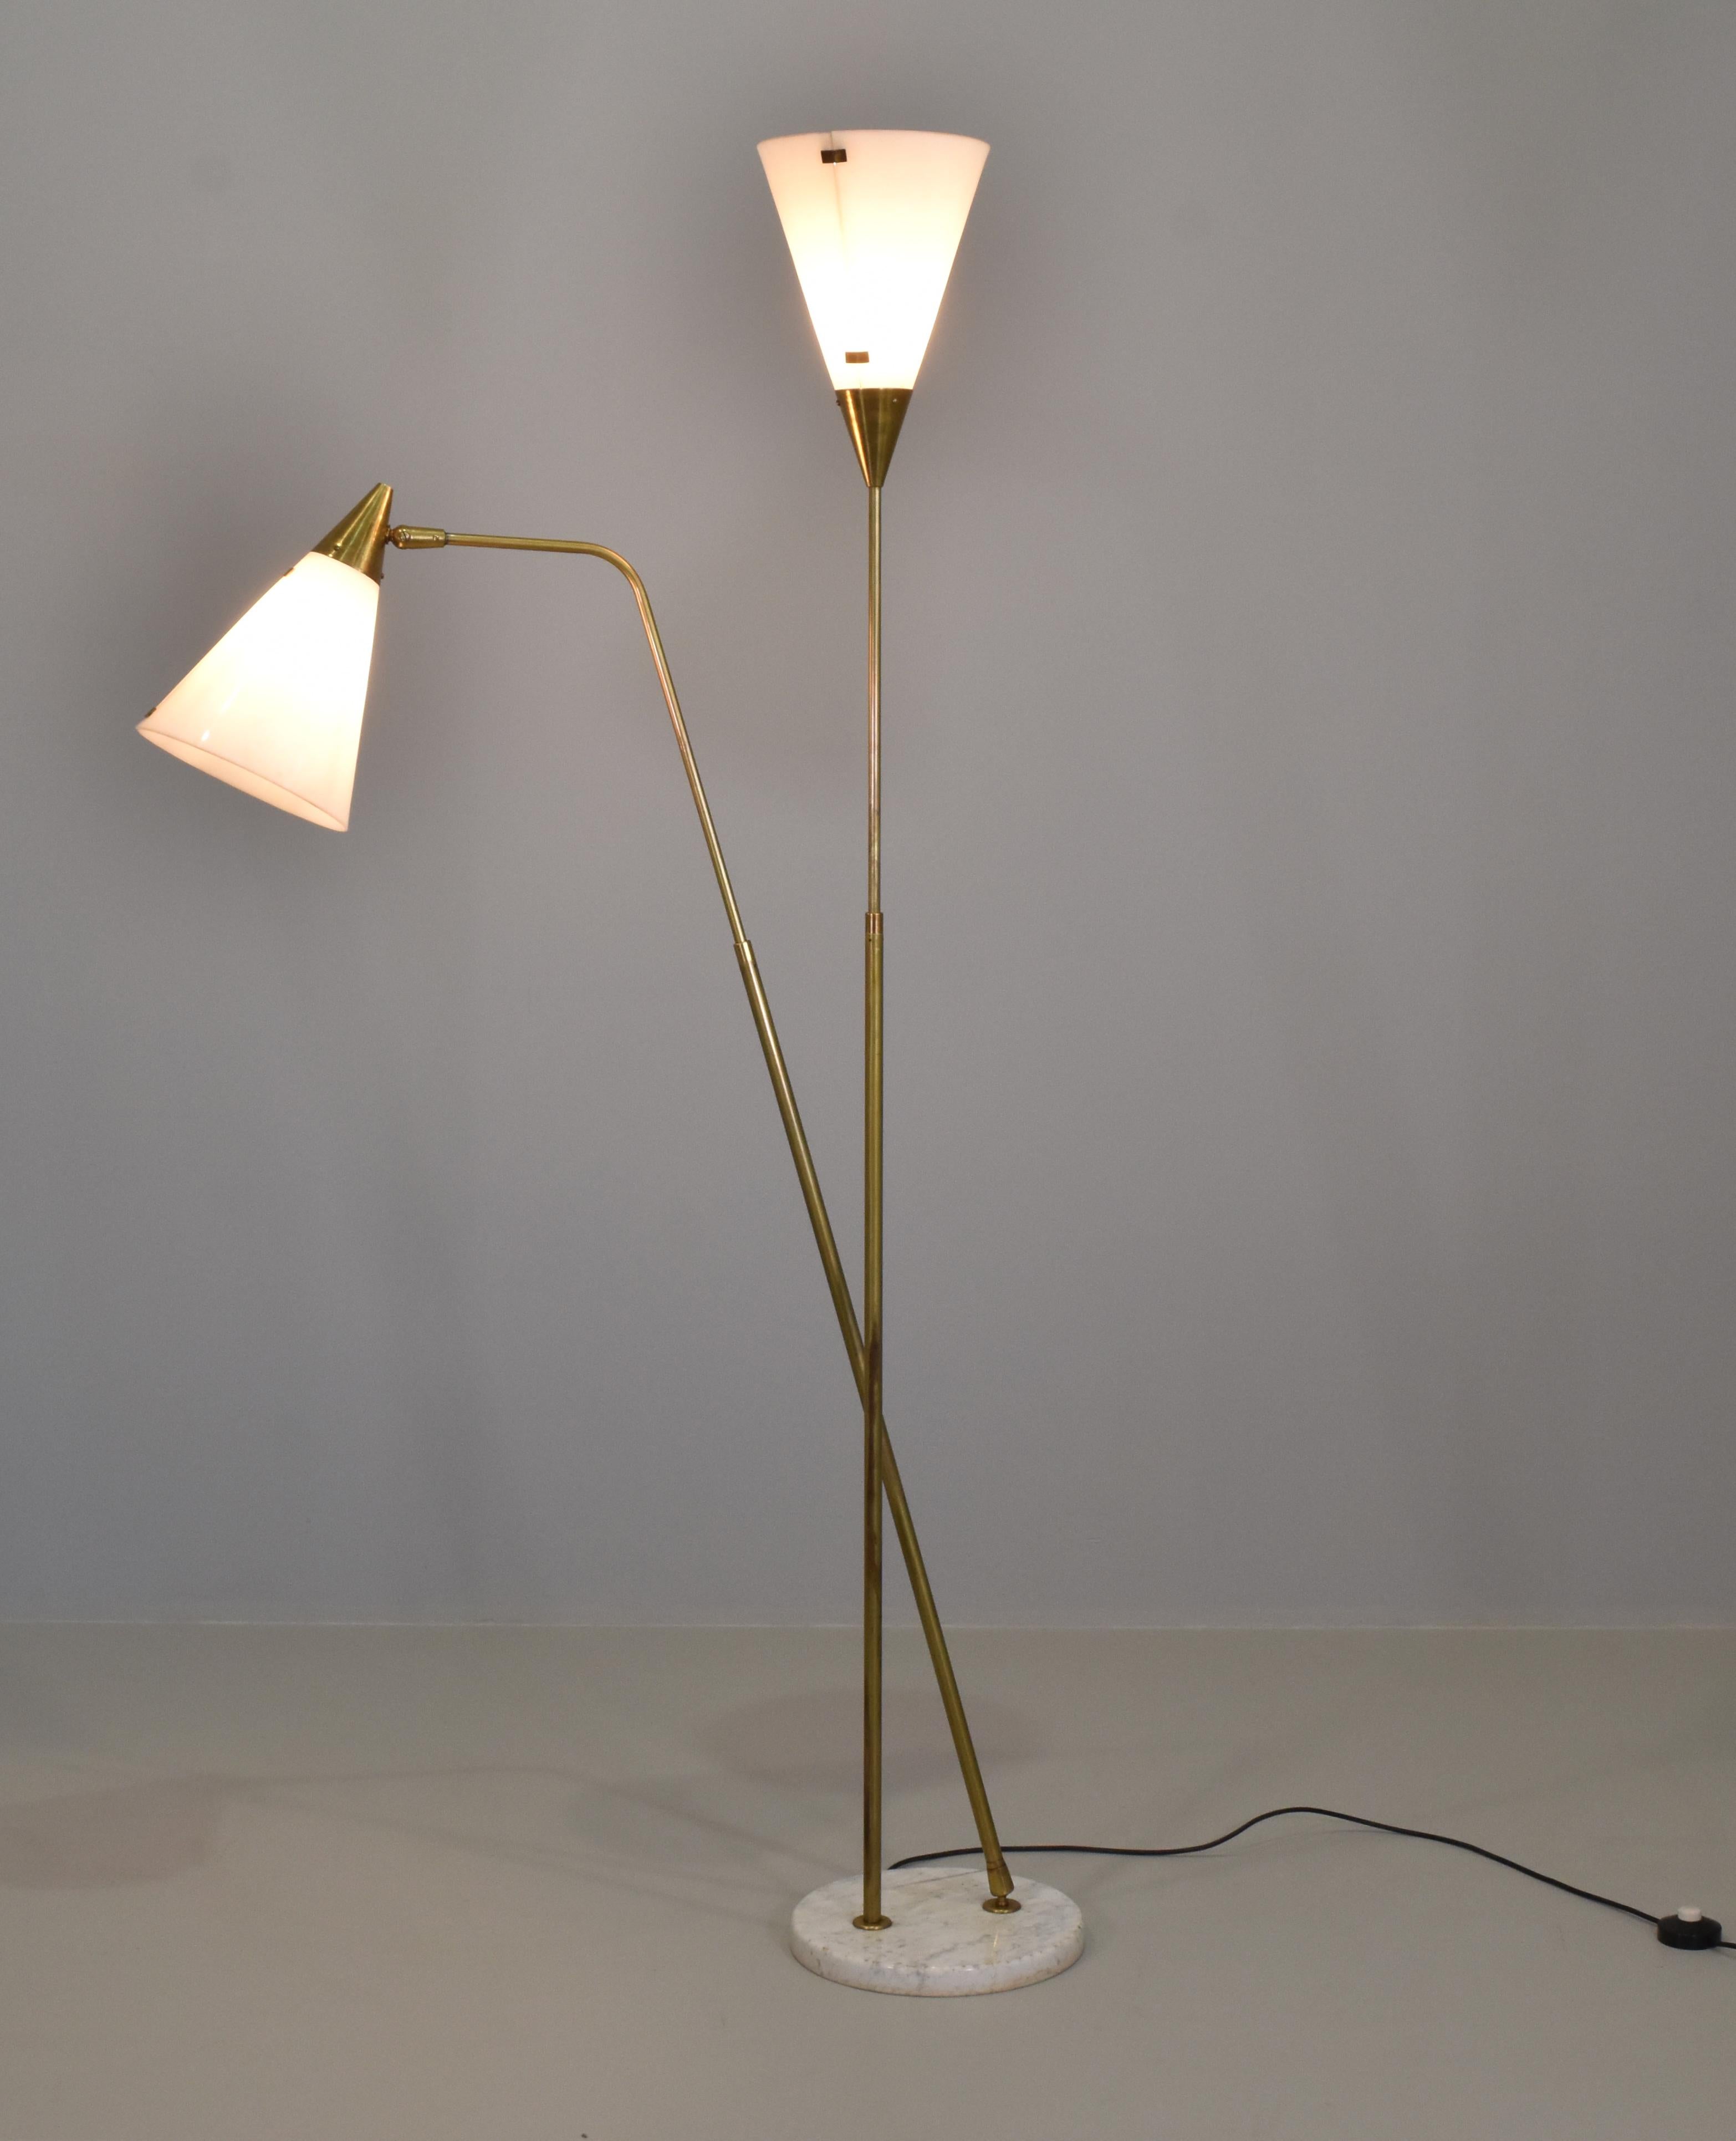 A rare model two-armed adjustable functionalist floor lamp. 
Designed by Guiseppe Ostuni and produced by O-Luce, Italy, 1950s. 
Rare execution with original acrylic lampshades.